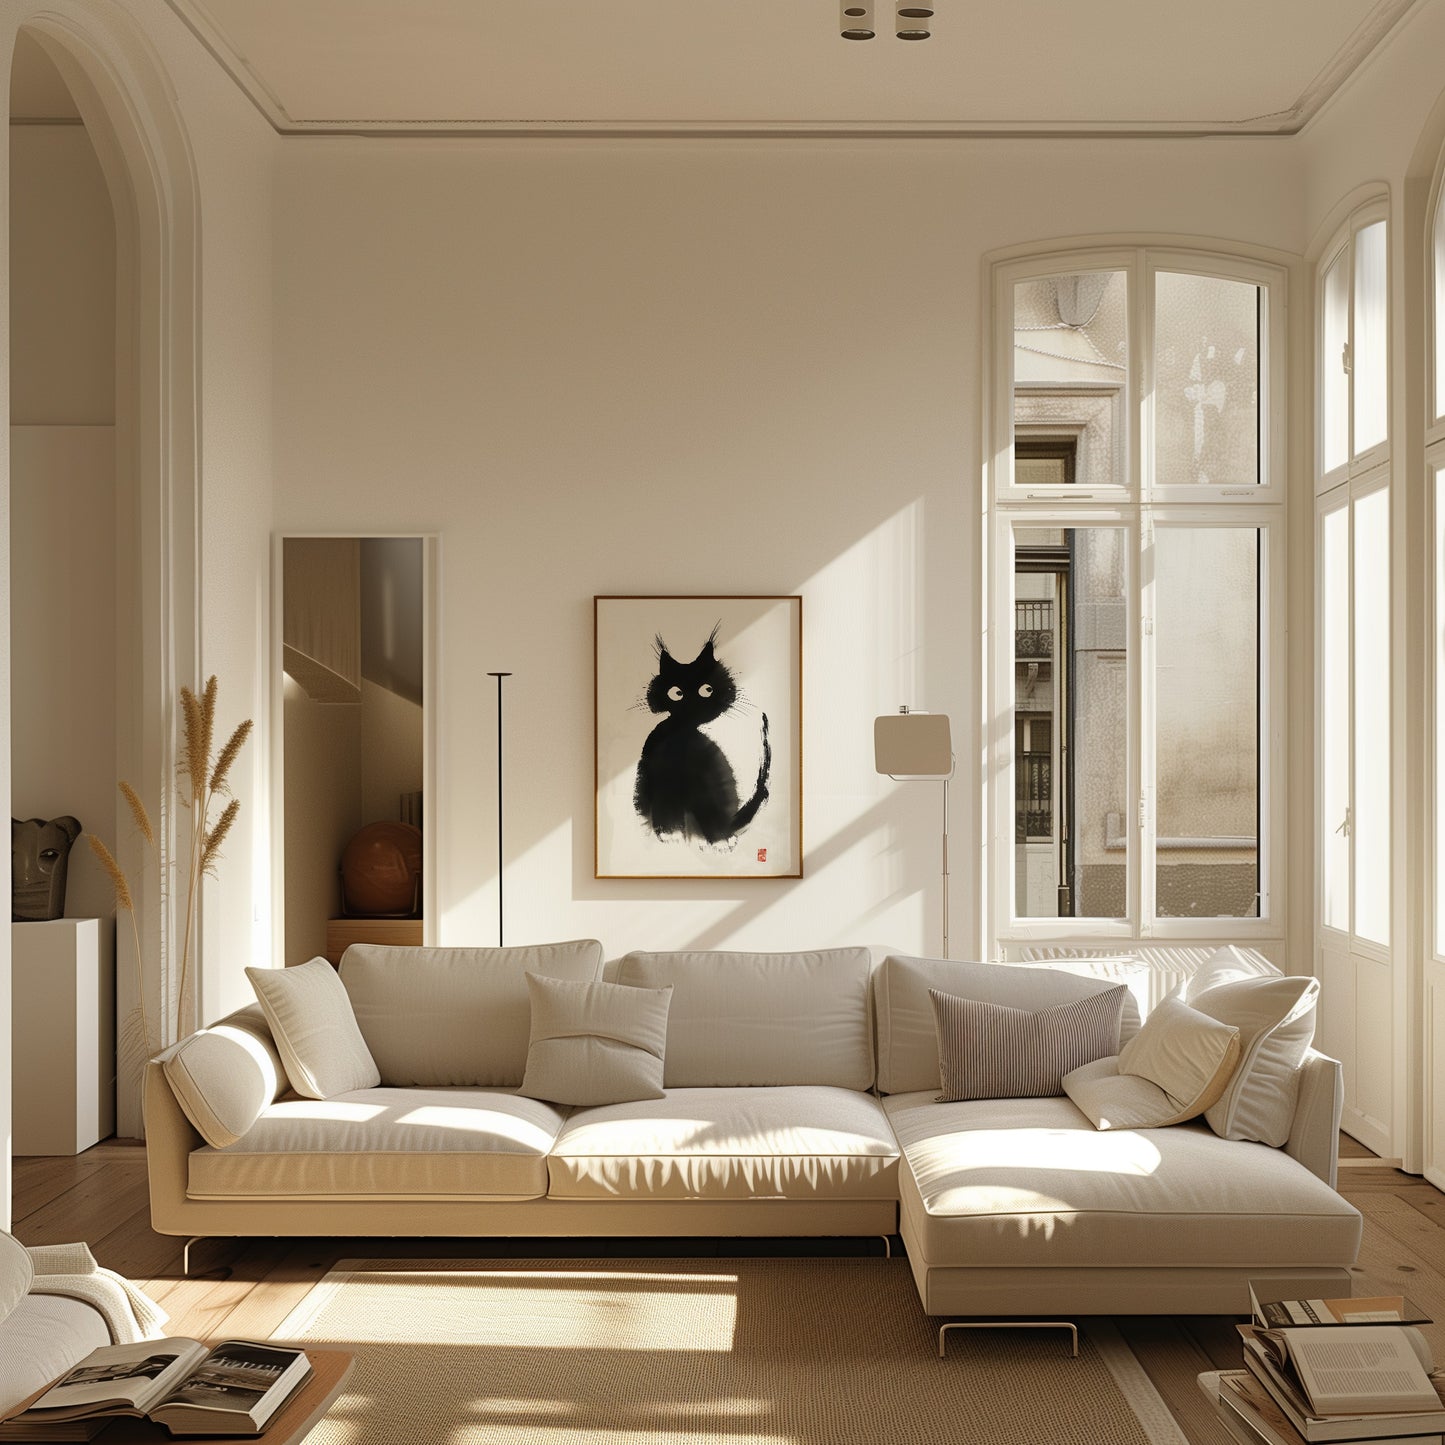 Bright living room with white sofa and a black cat painting on the wall.